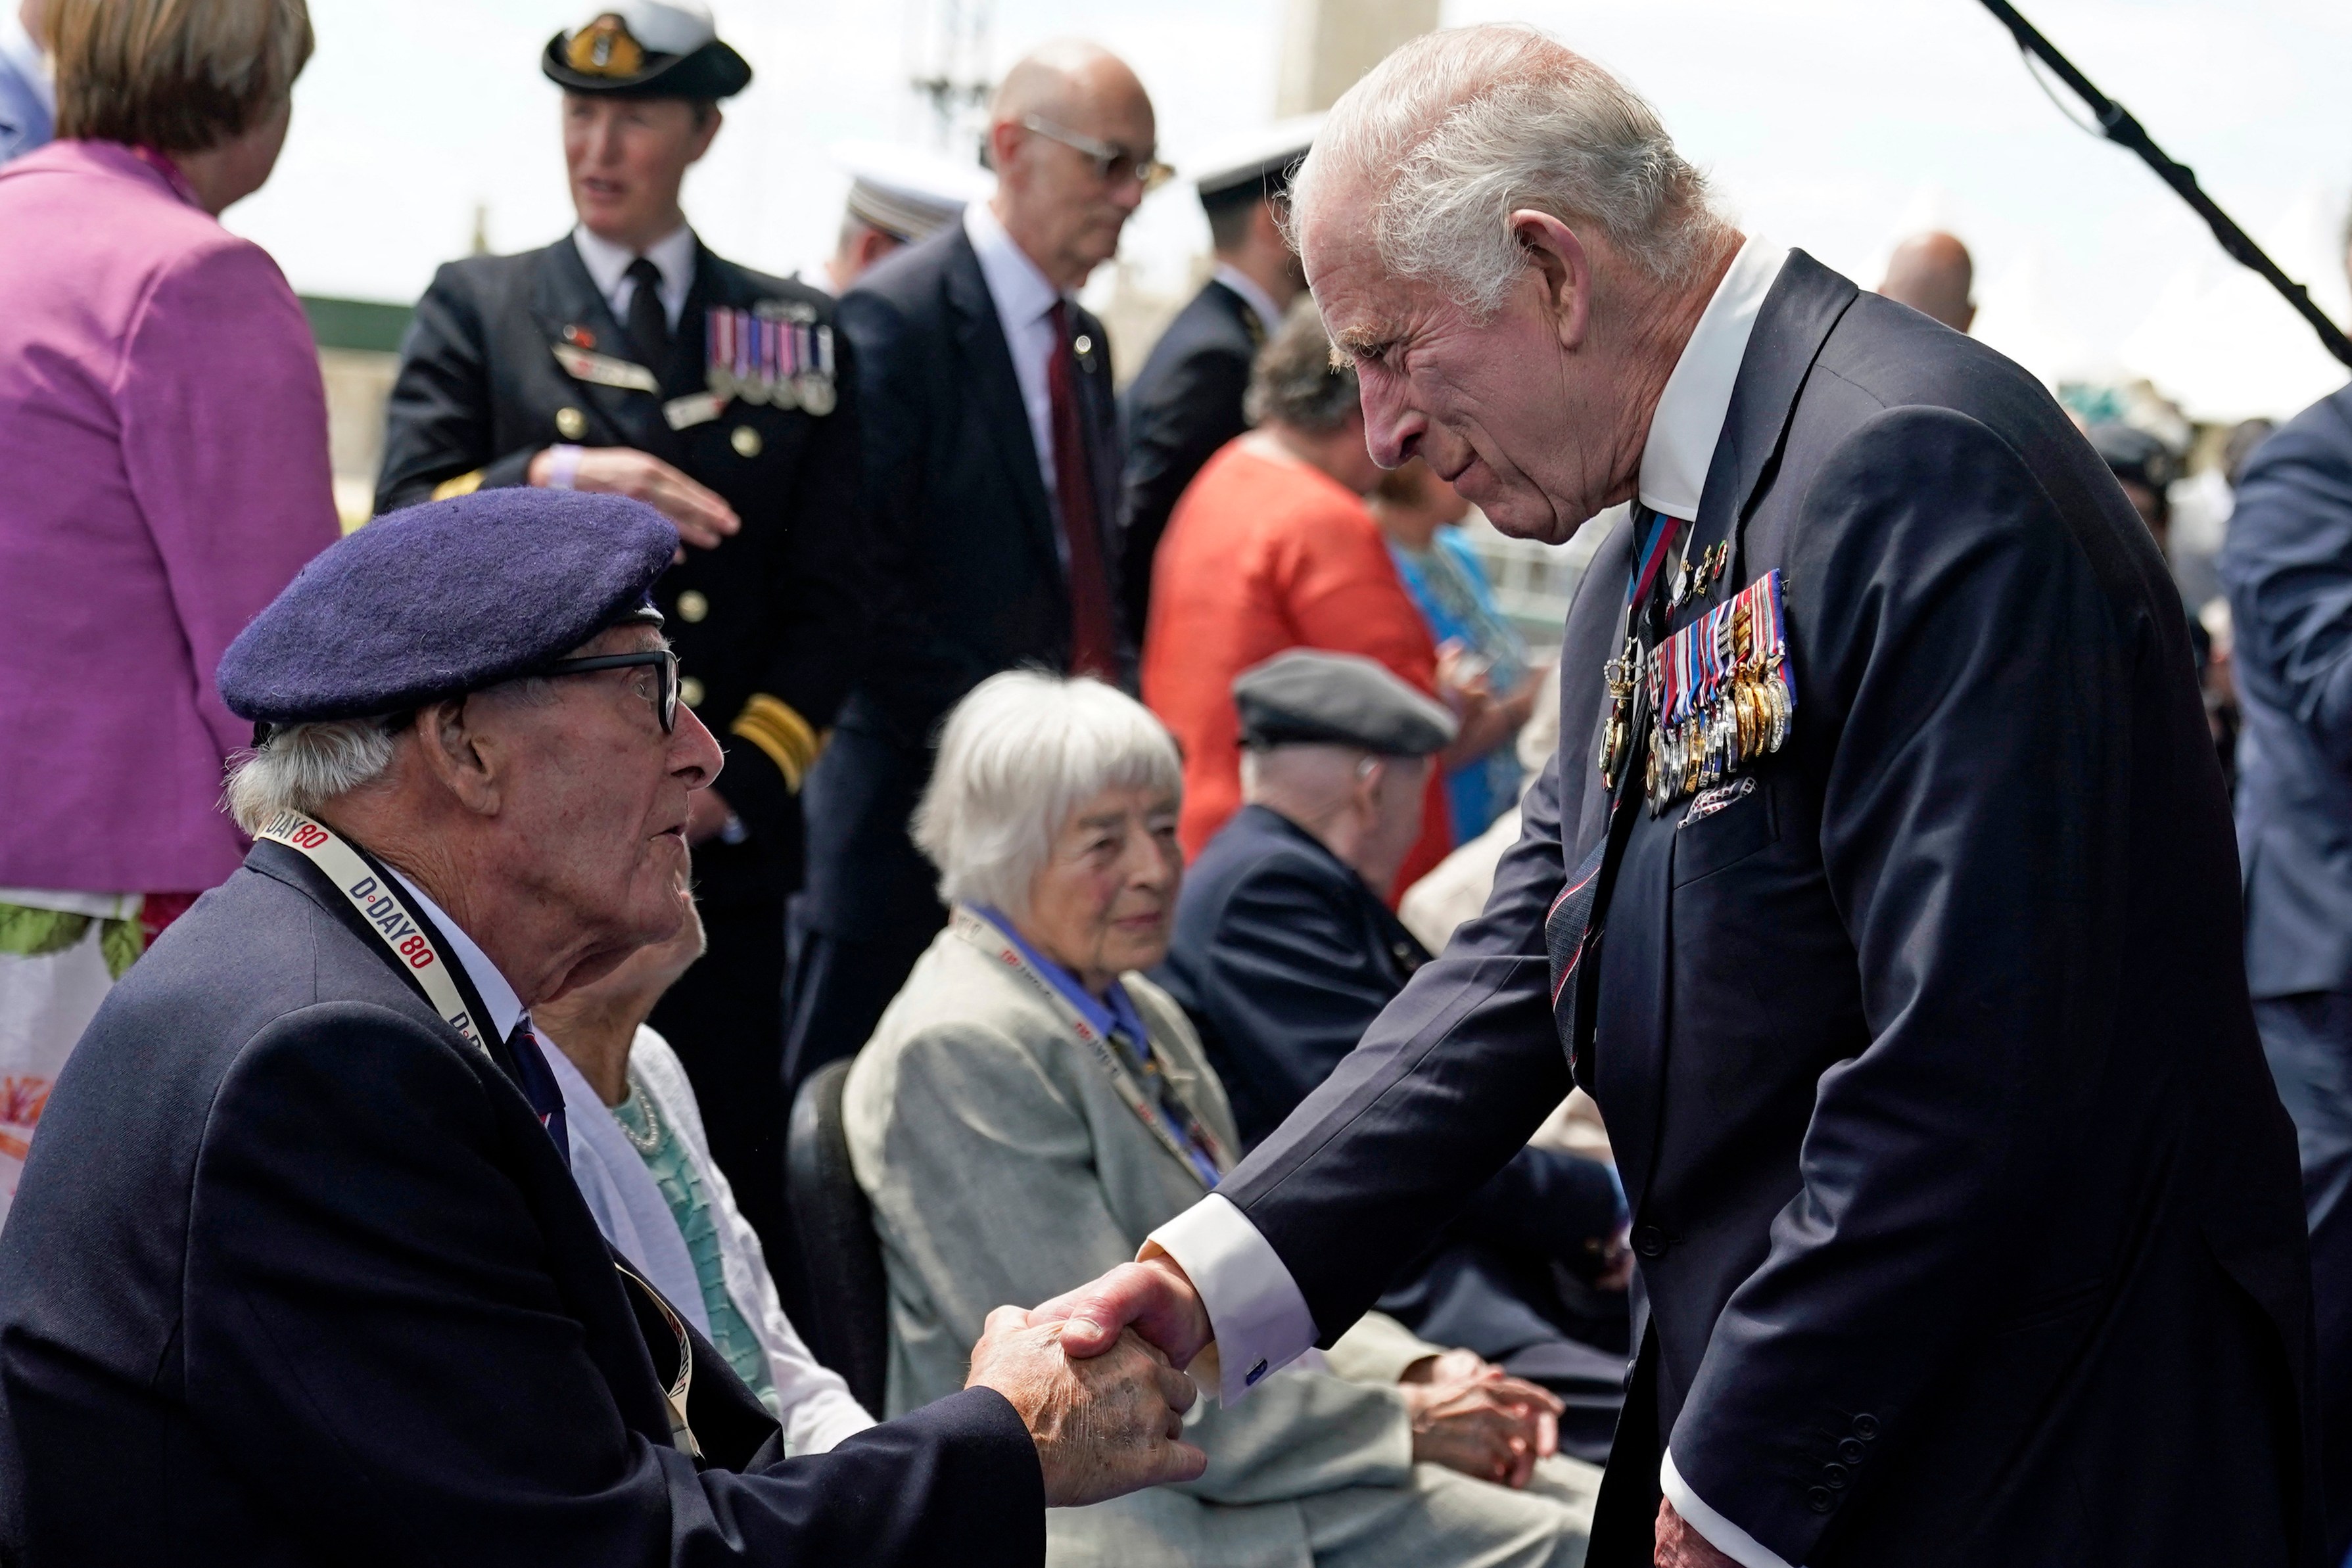 Charles talks to the D-Day veteran Eric Bateman, who served on the warship HMS Erebus